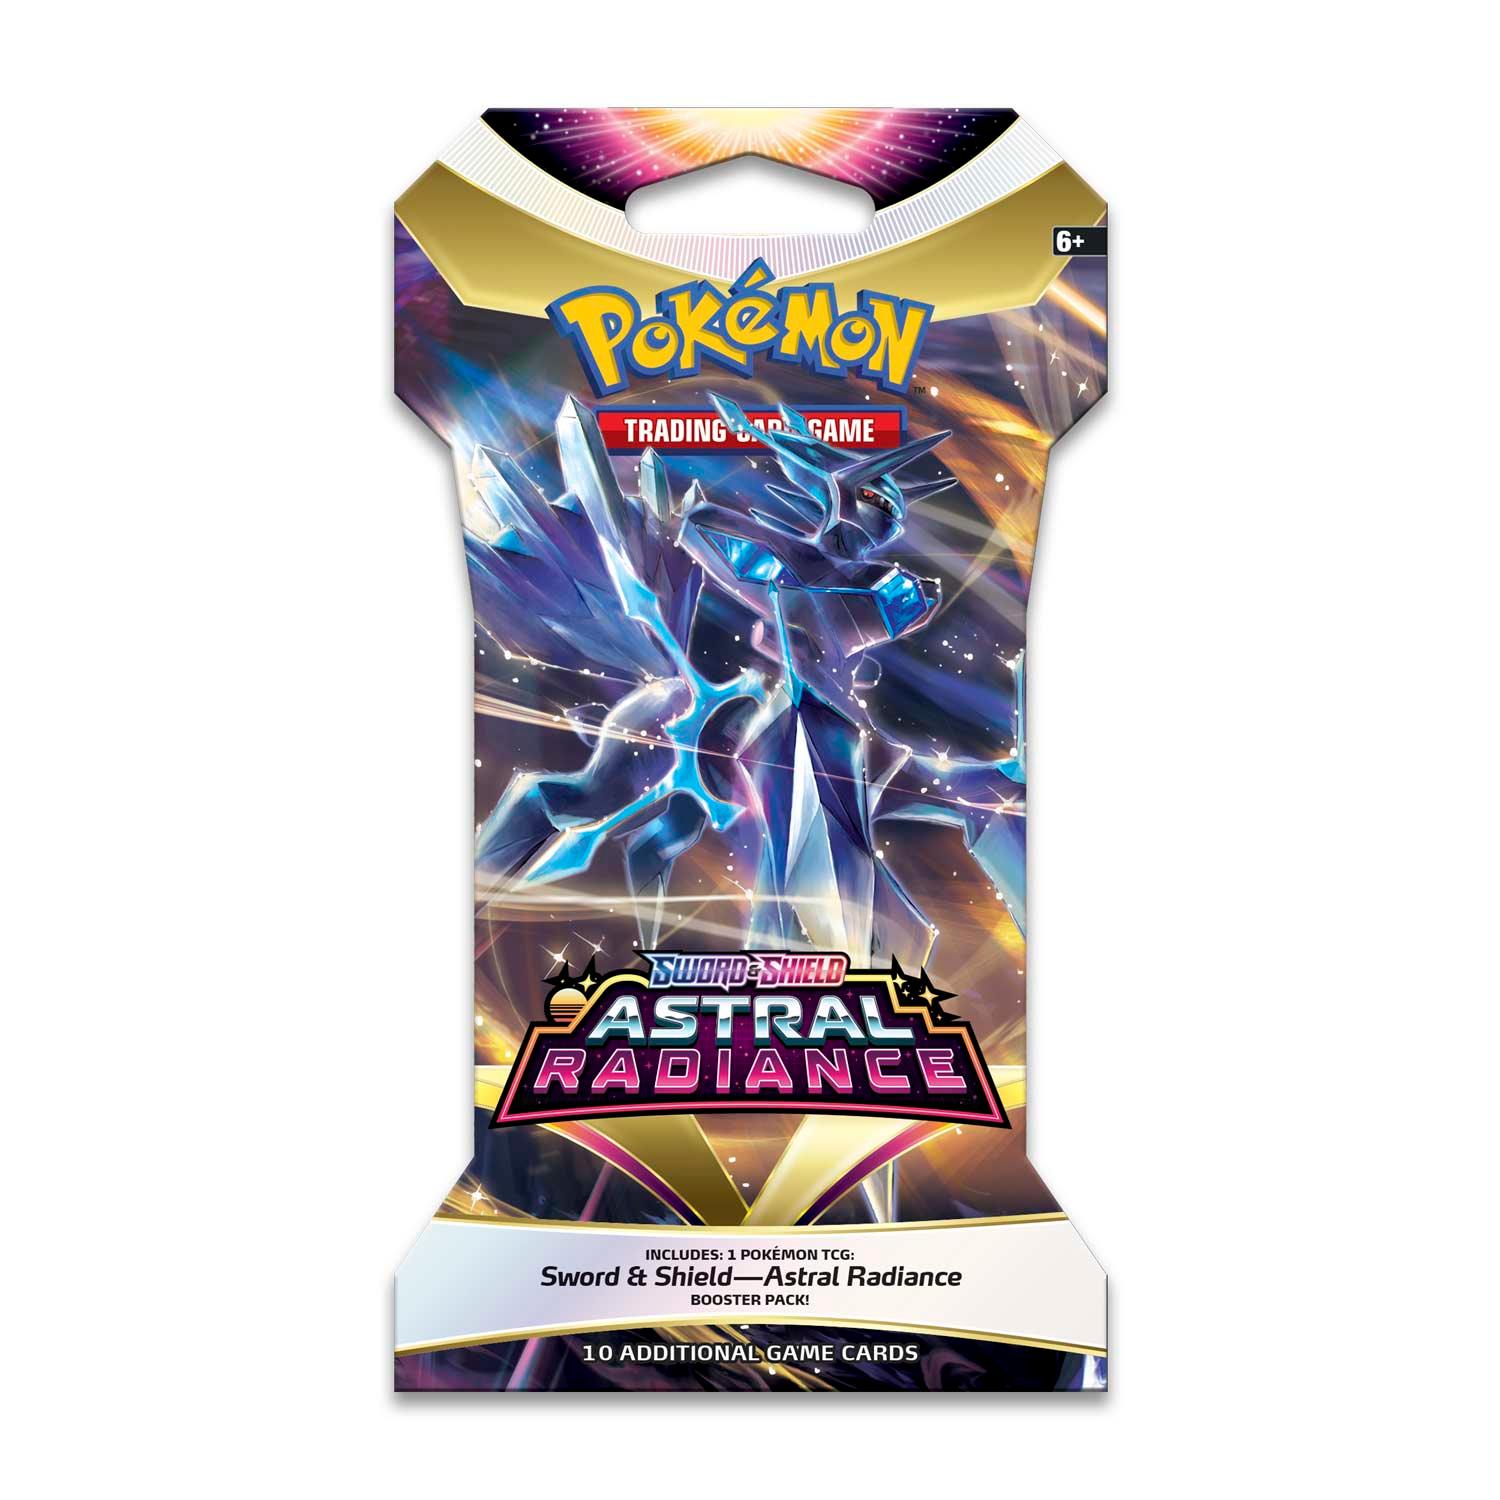 Pokemon Sleeved Booster Pack (10 Cards) - Sword & Shield - Astral Radiance - Hobby Champion Inc